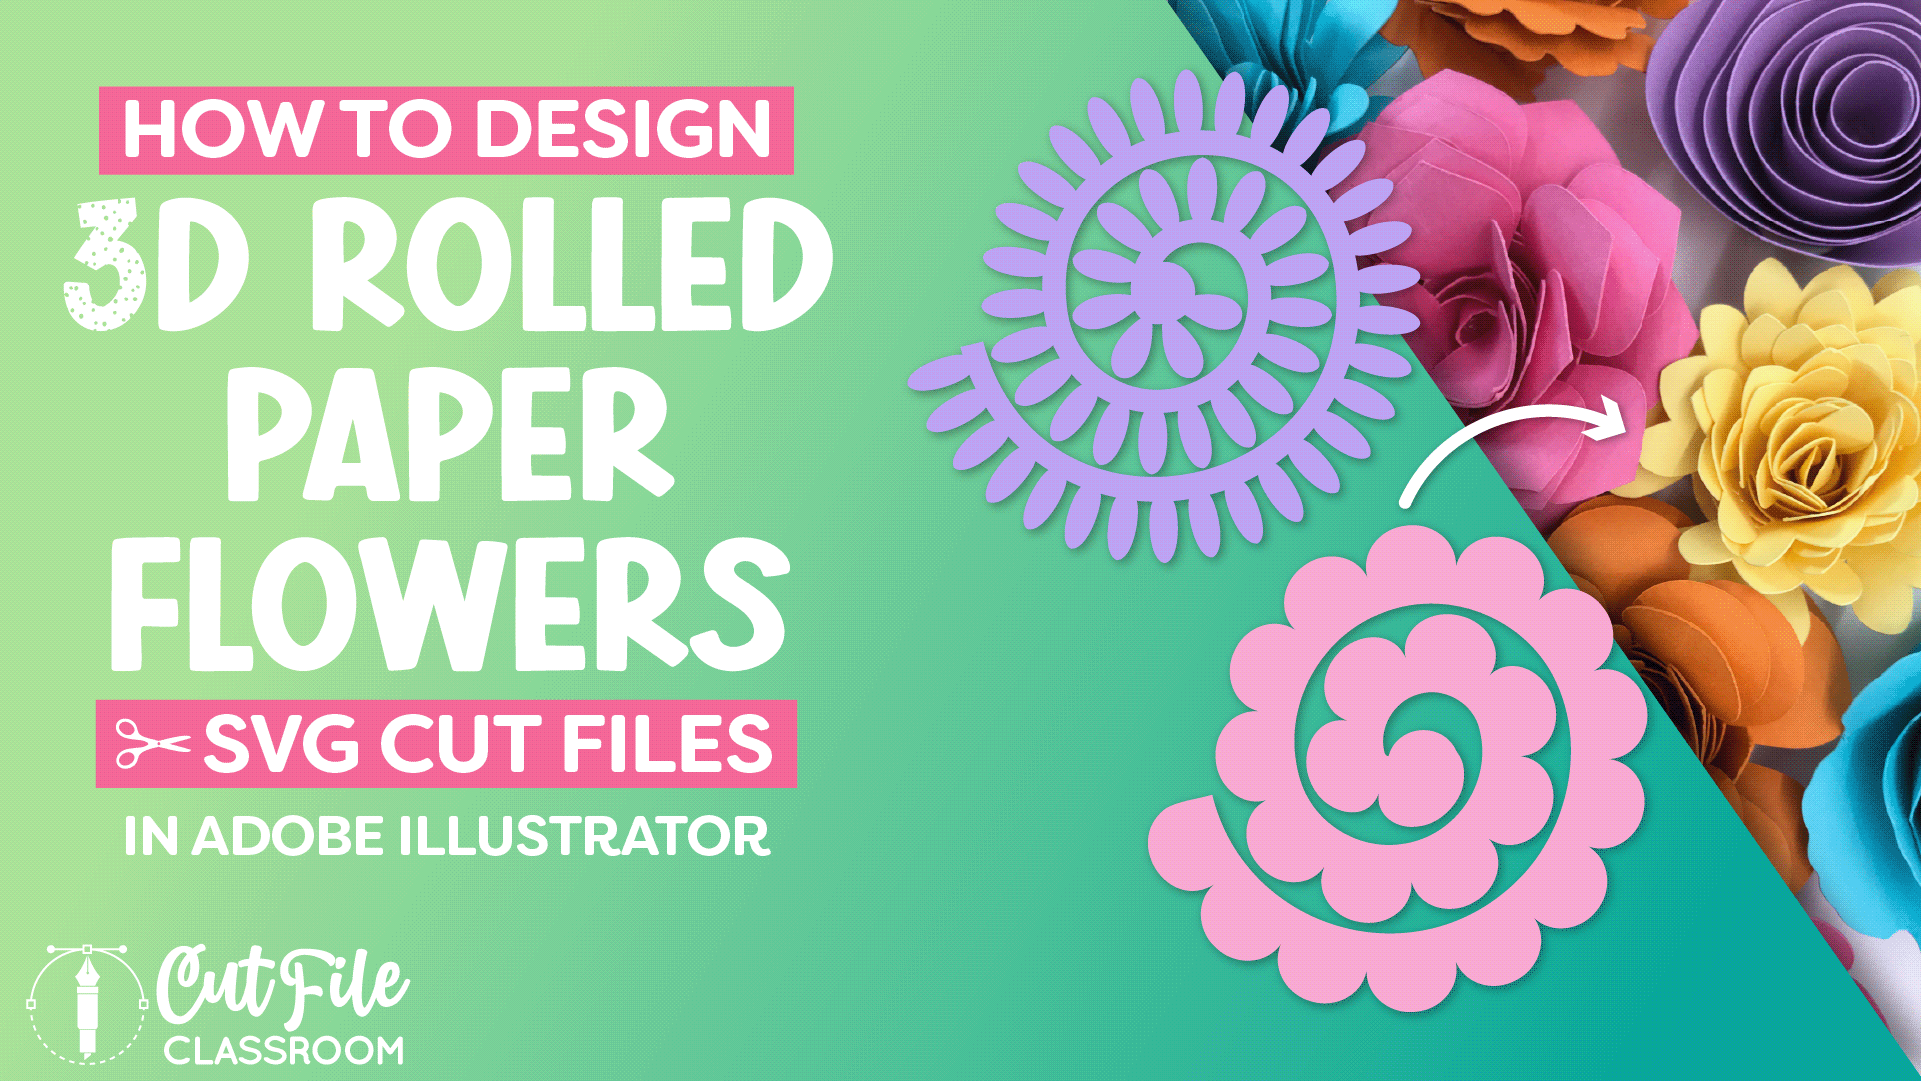 How to Design 3D Rolled Paper Flowers SVG Cut Files in Adobe Illustrator